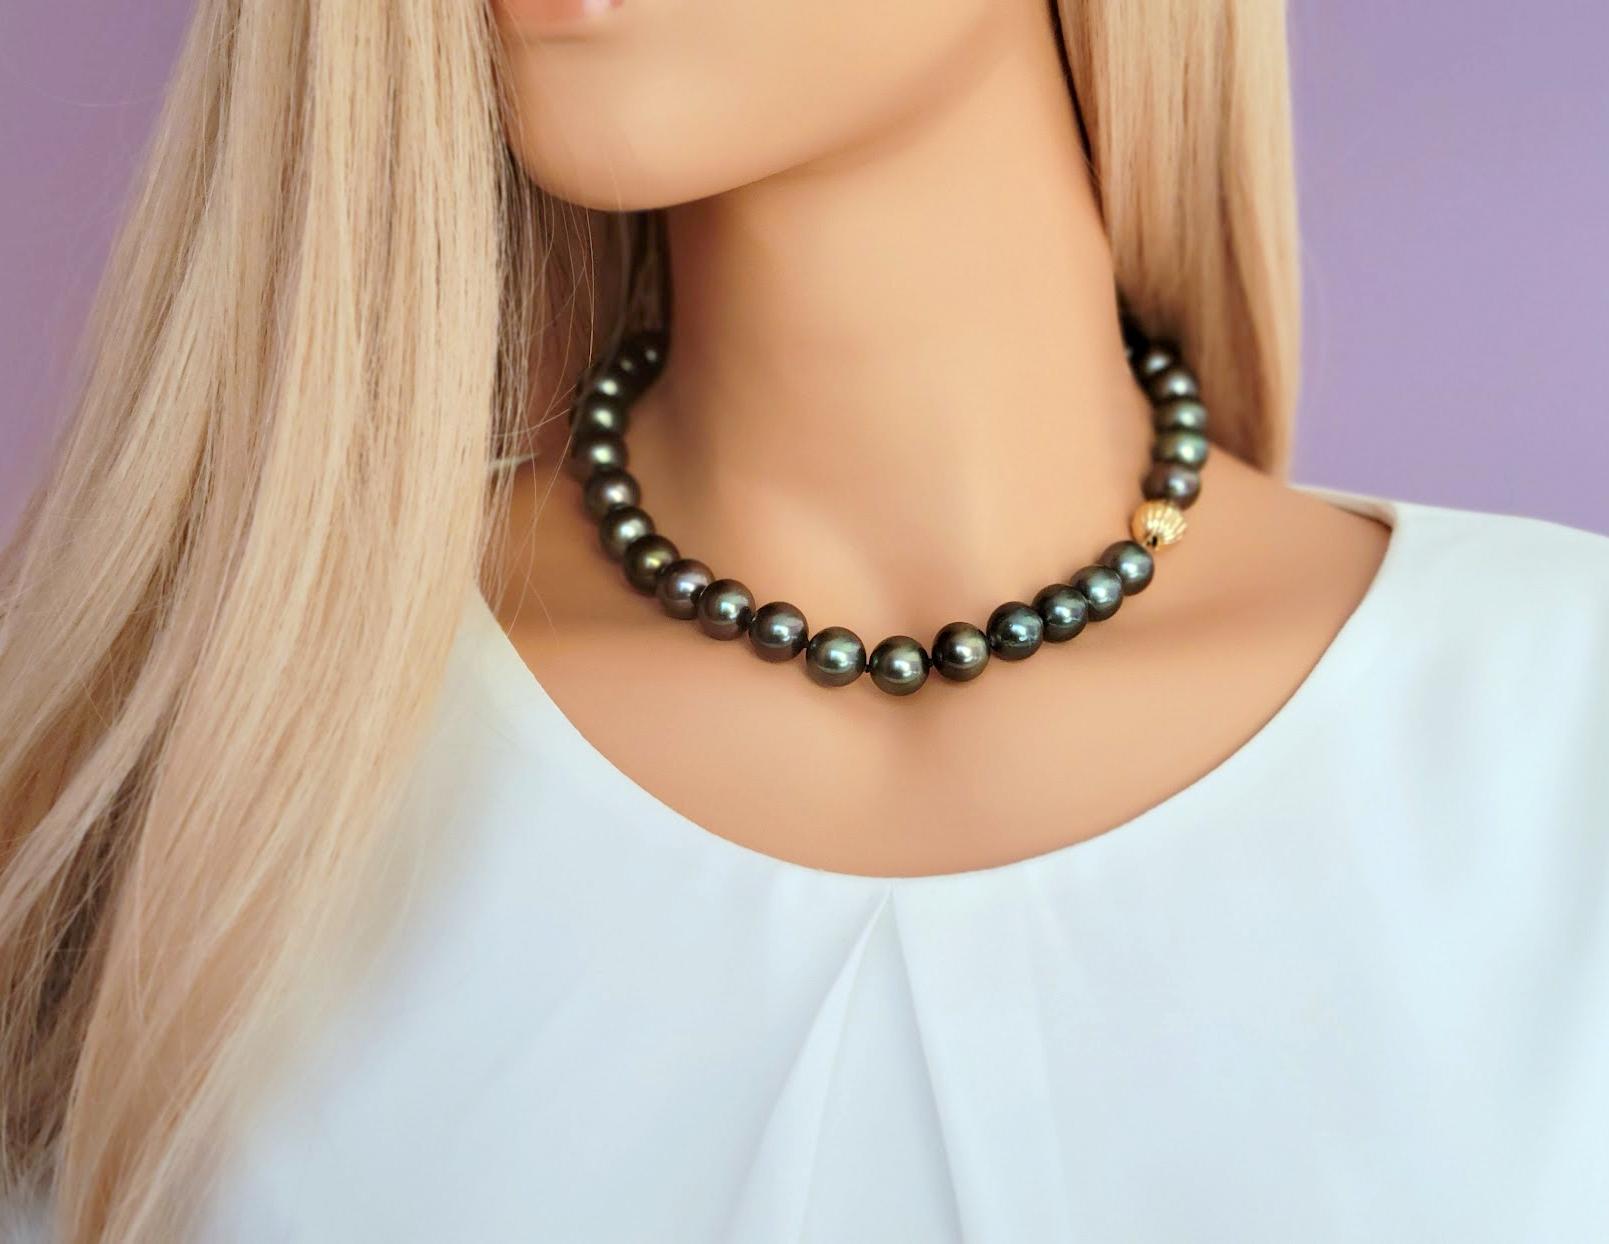 Tahitian Black Pearl Necklace In Excellent Condition For Sale In Chesterland, OH